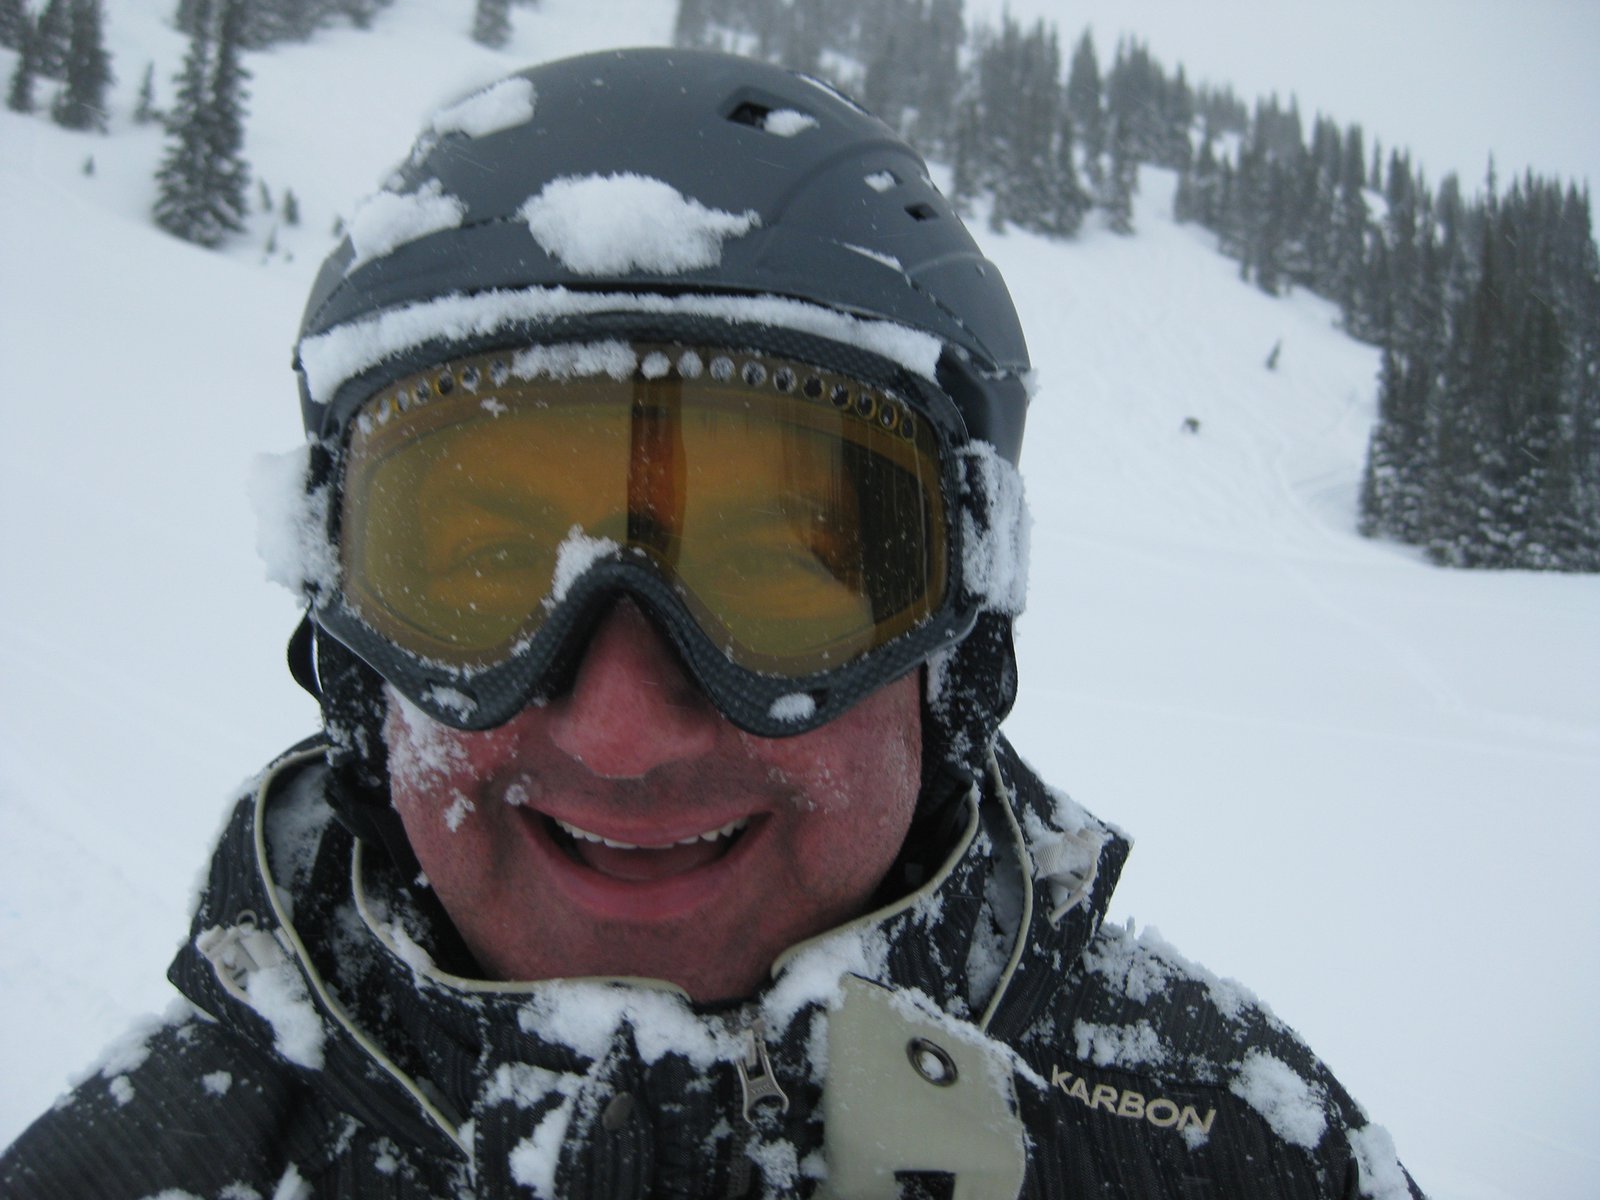 My Dad stoked on an epic pow day